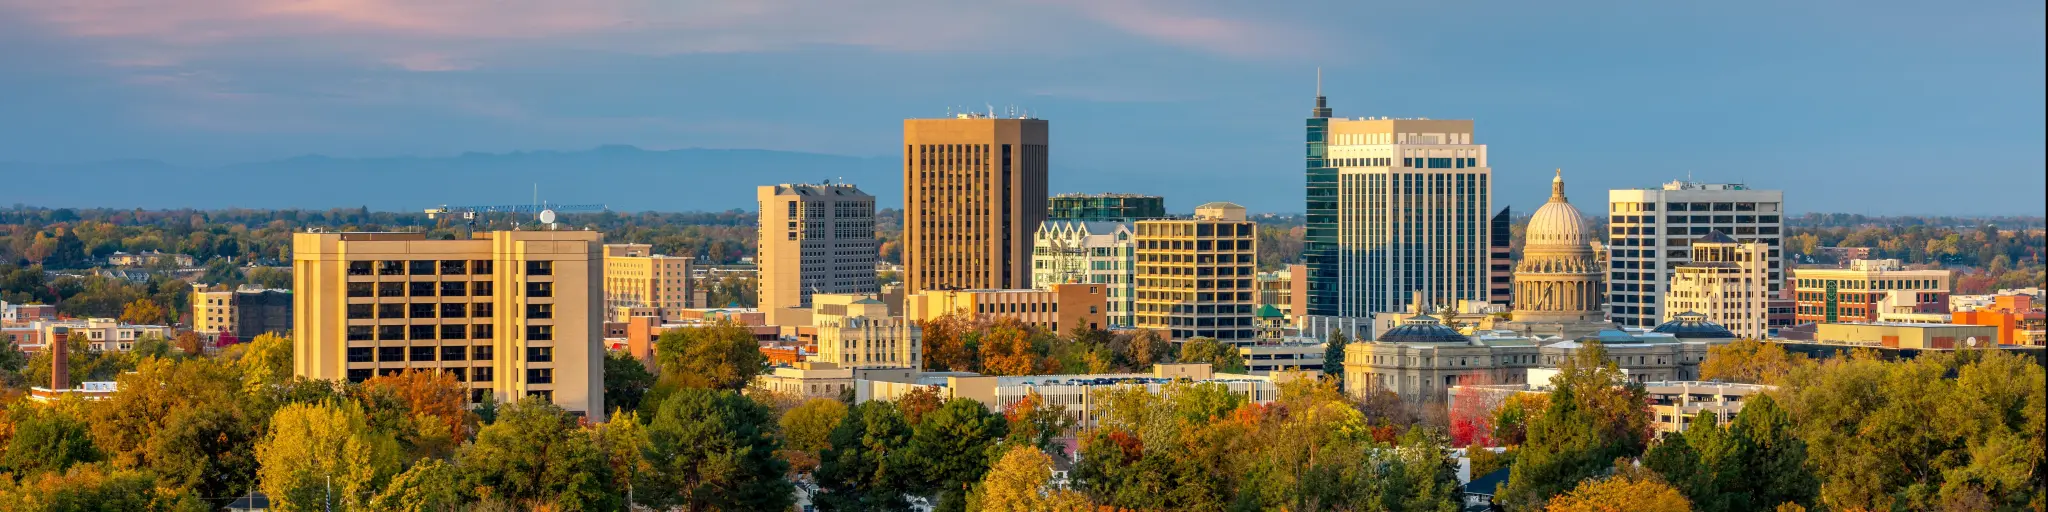 Boise, Idaho, USA with the city skyline taken during fall, trees in the foreground and a sky with pinks and blues.